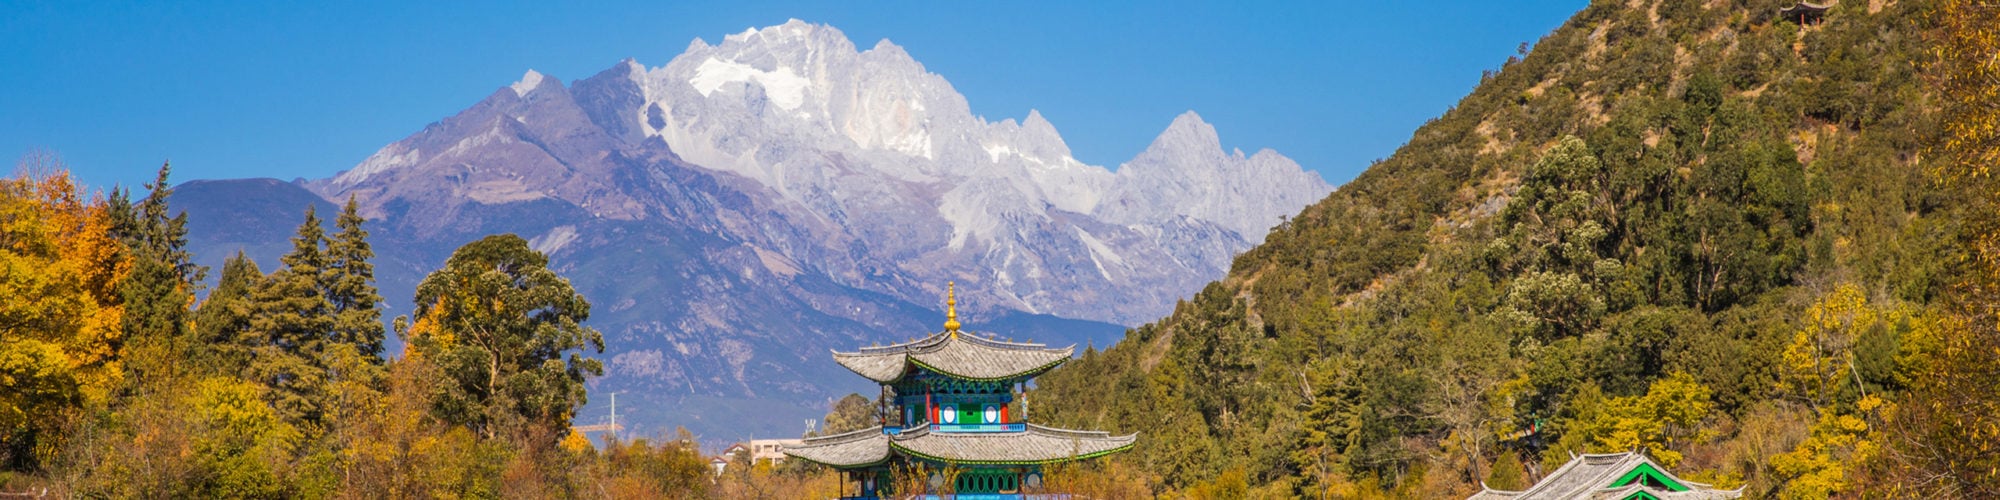 Lijiang travel agents packages deals